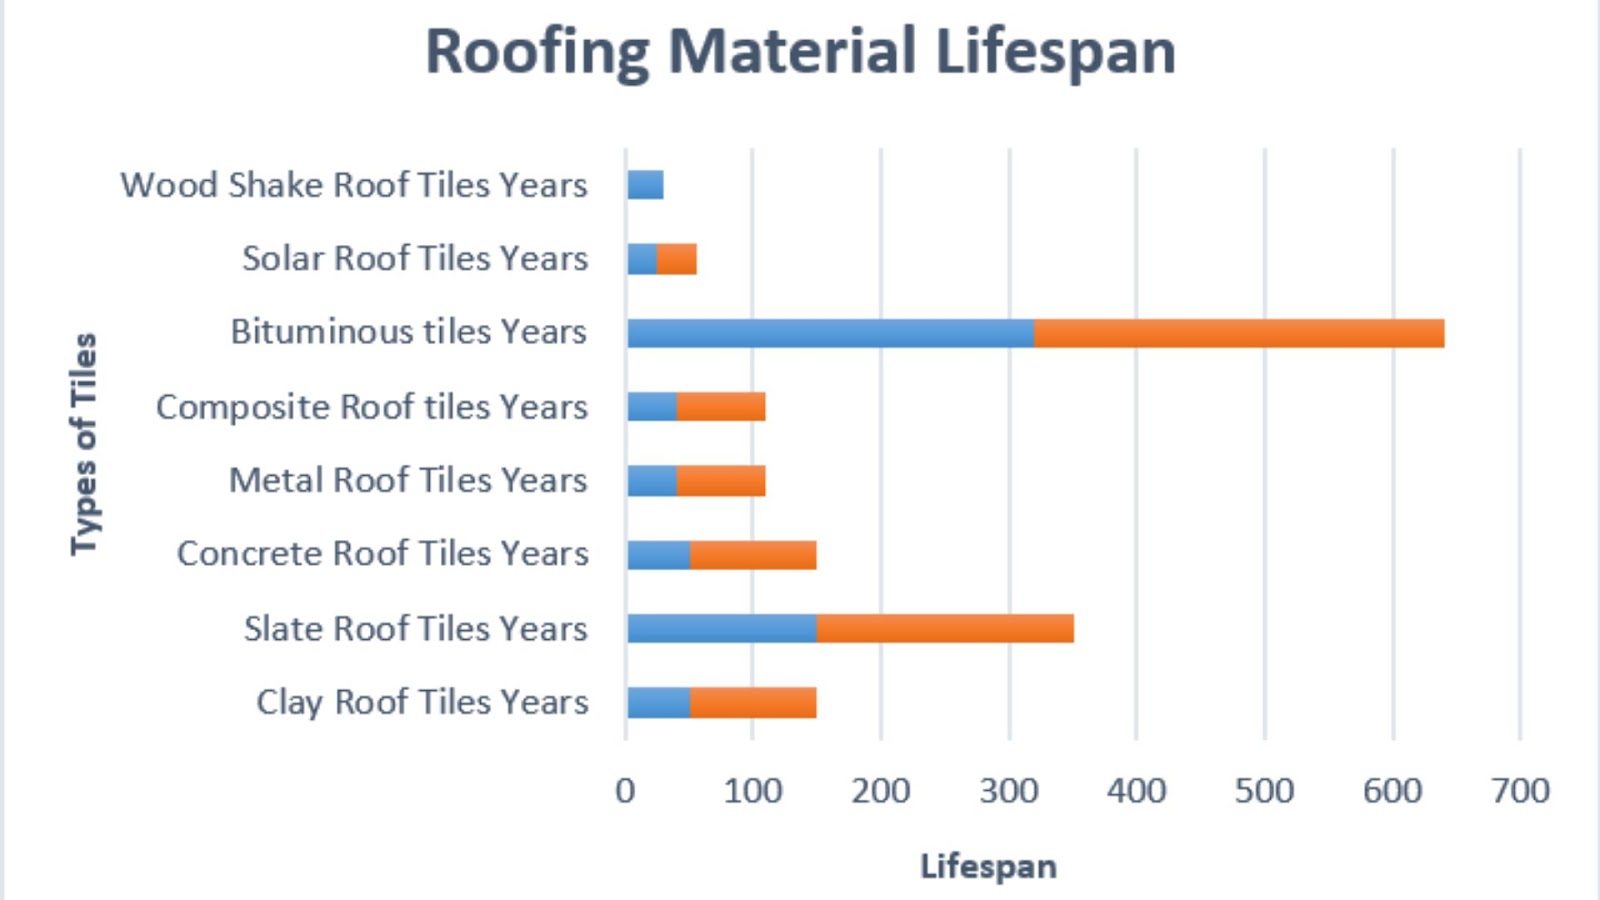 Roofing Material Lifespan Over 100 Years